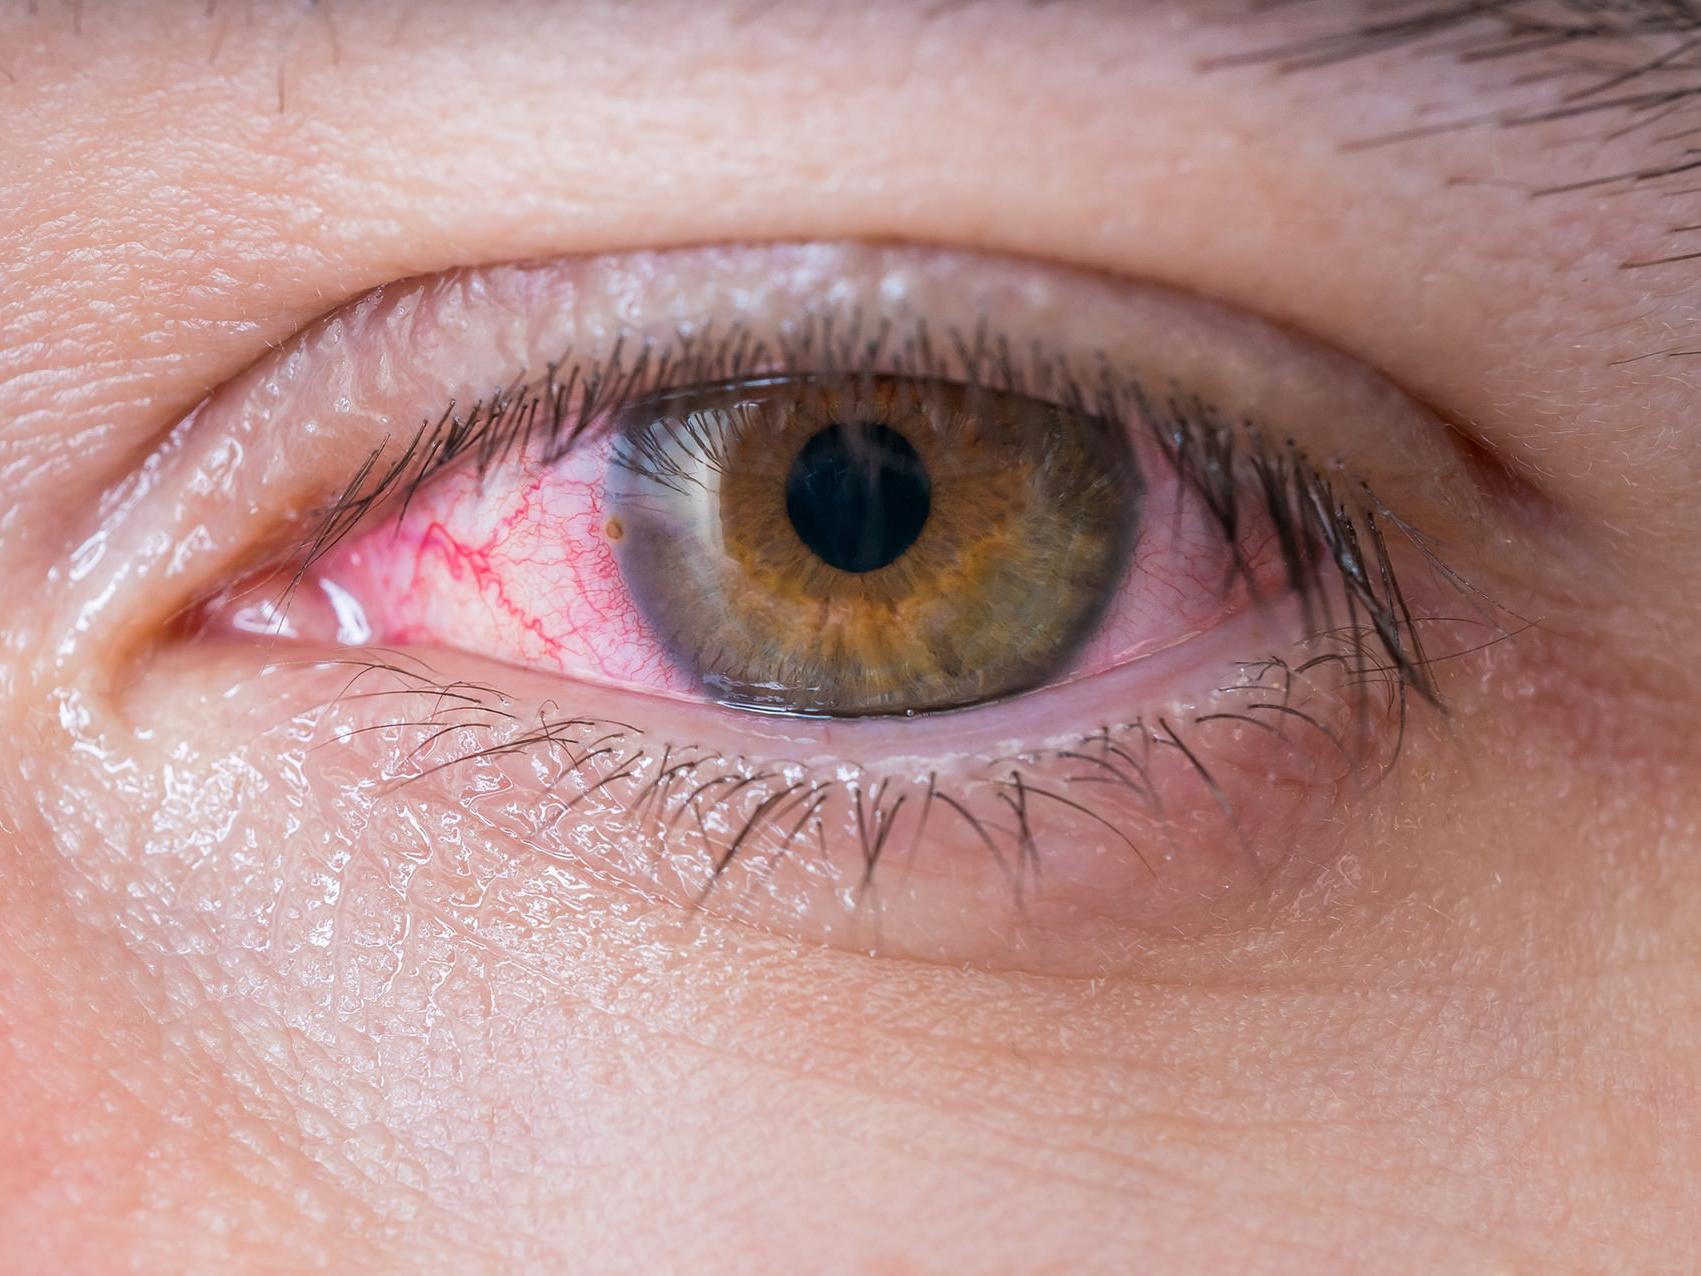 The image shows a close-up of an unhealthy eye, illustrating the appearance of potential eye hazards. 